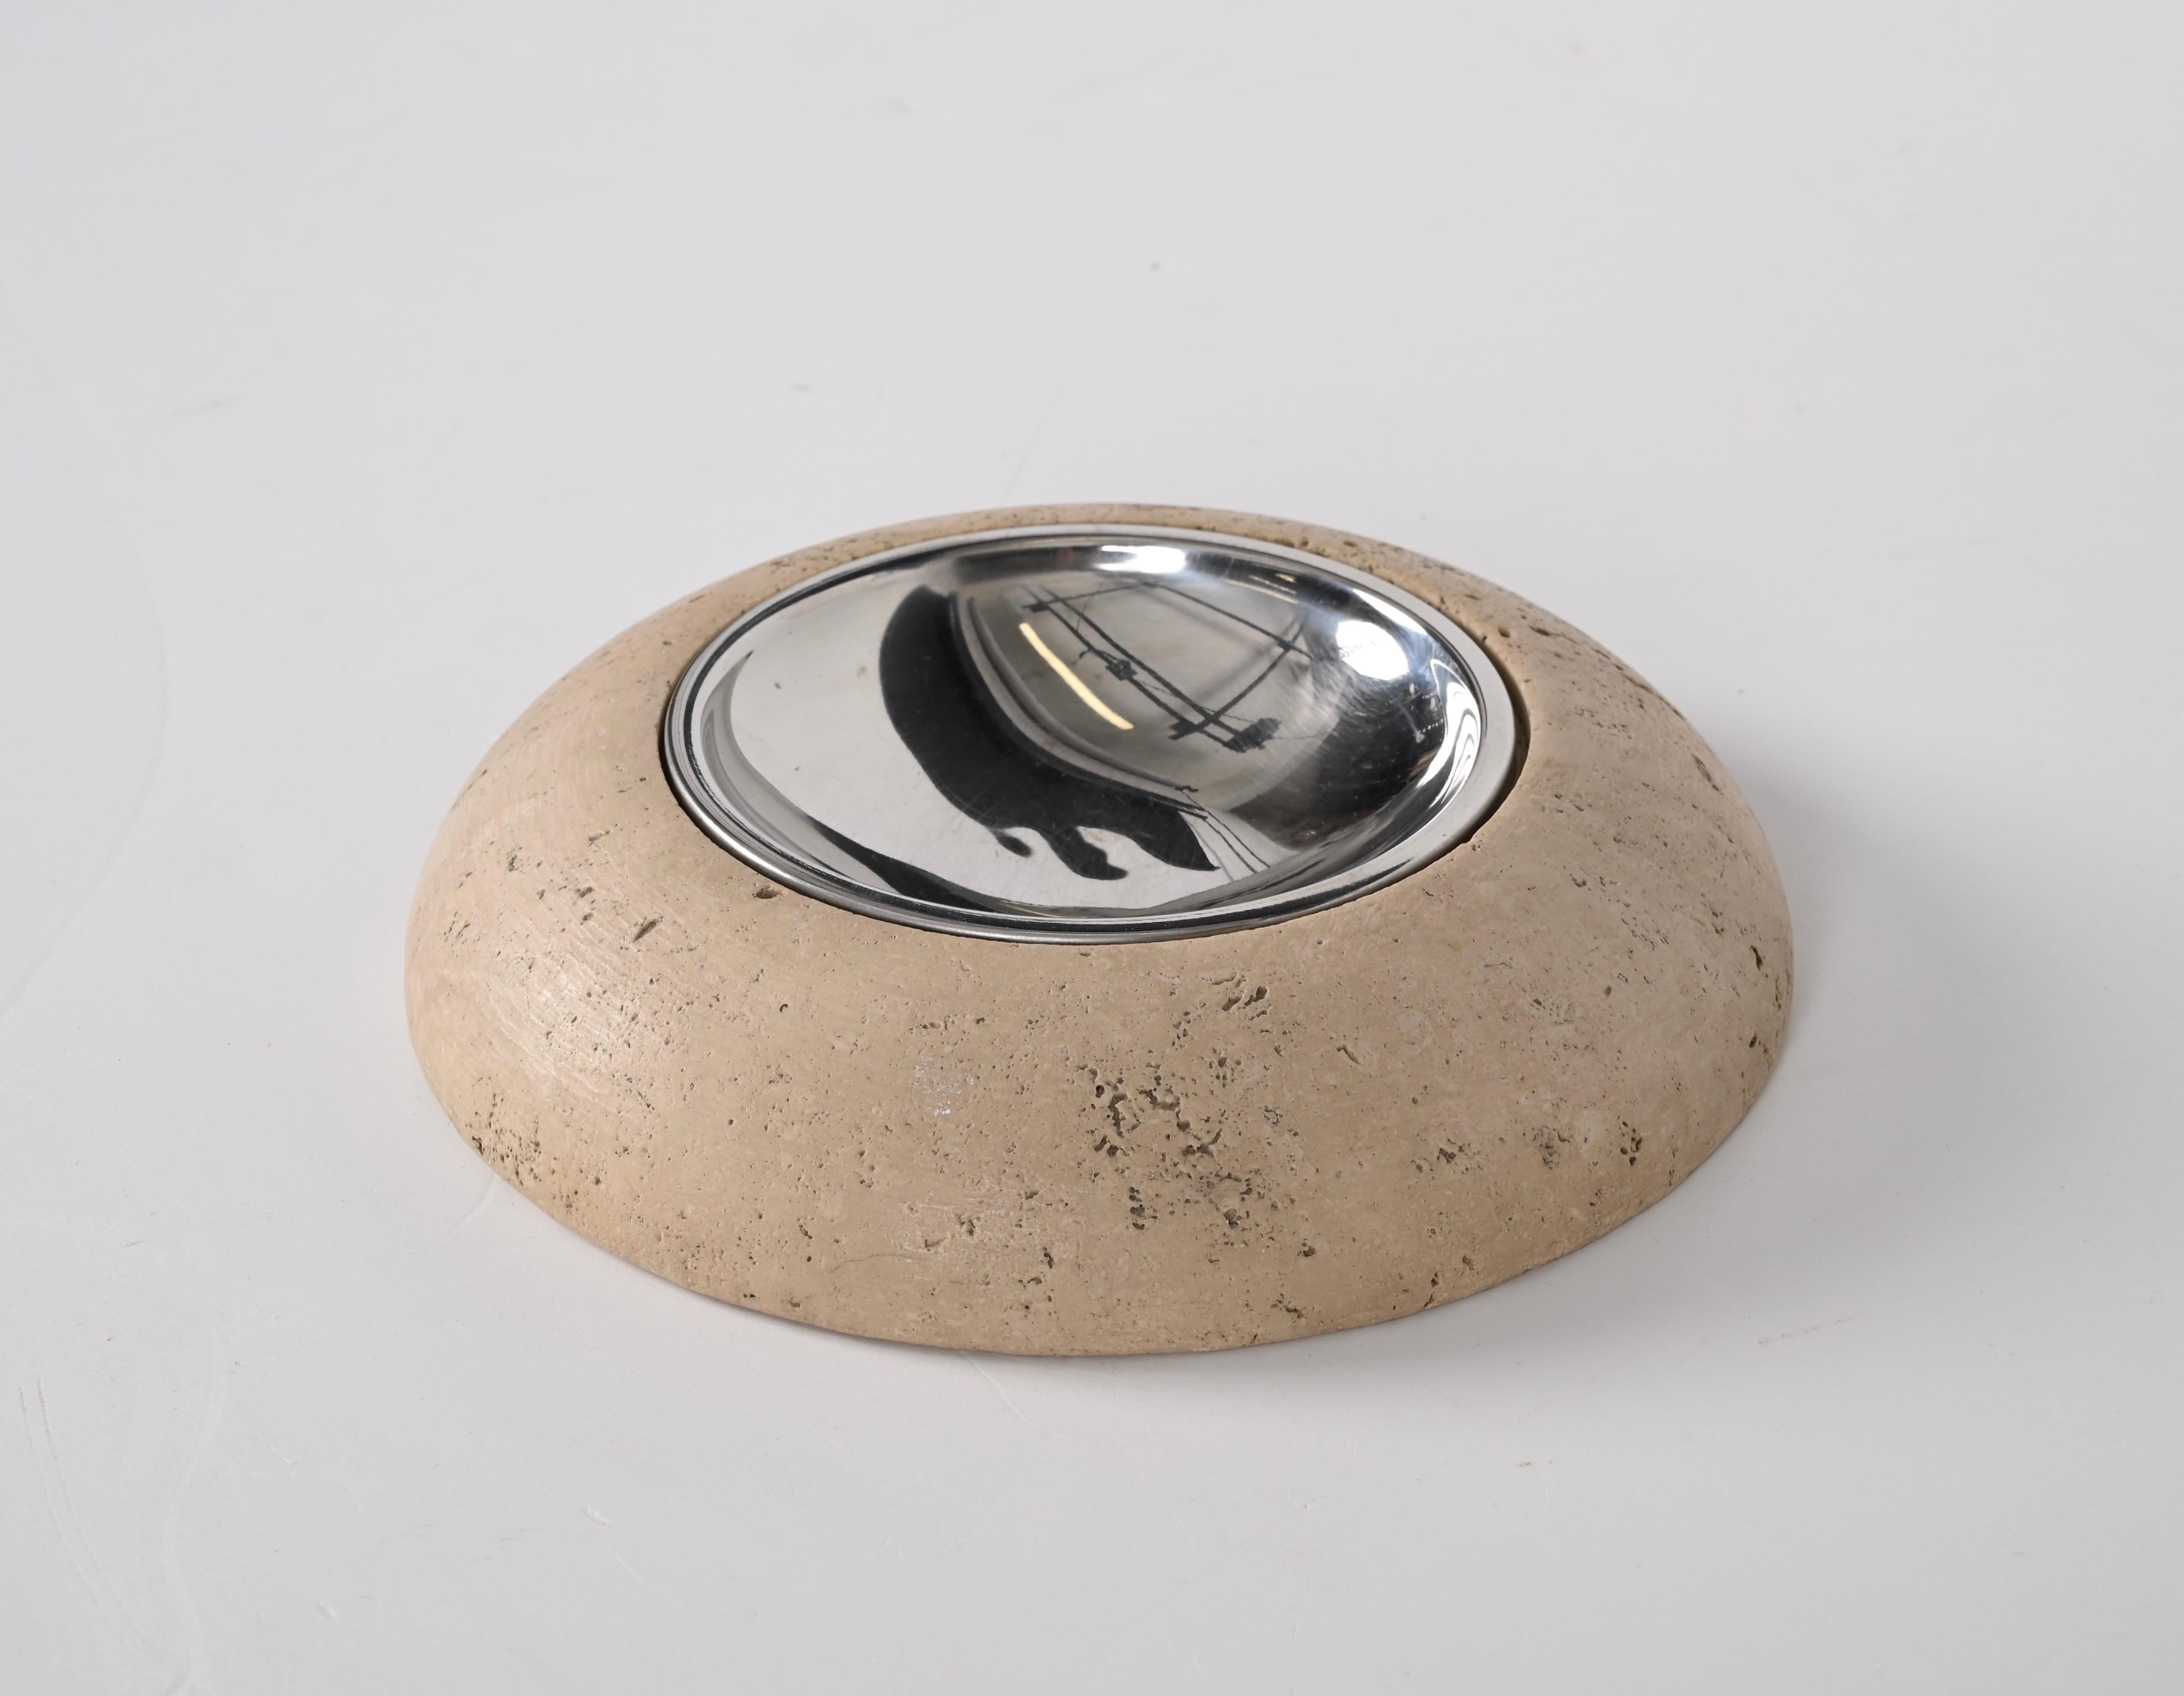 20th Century Midcentury Round Ashtray White Travertine Marble and Steel, Mannelli Italy 1970s For Sale